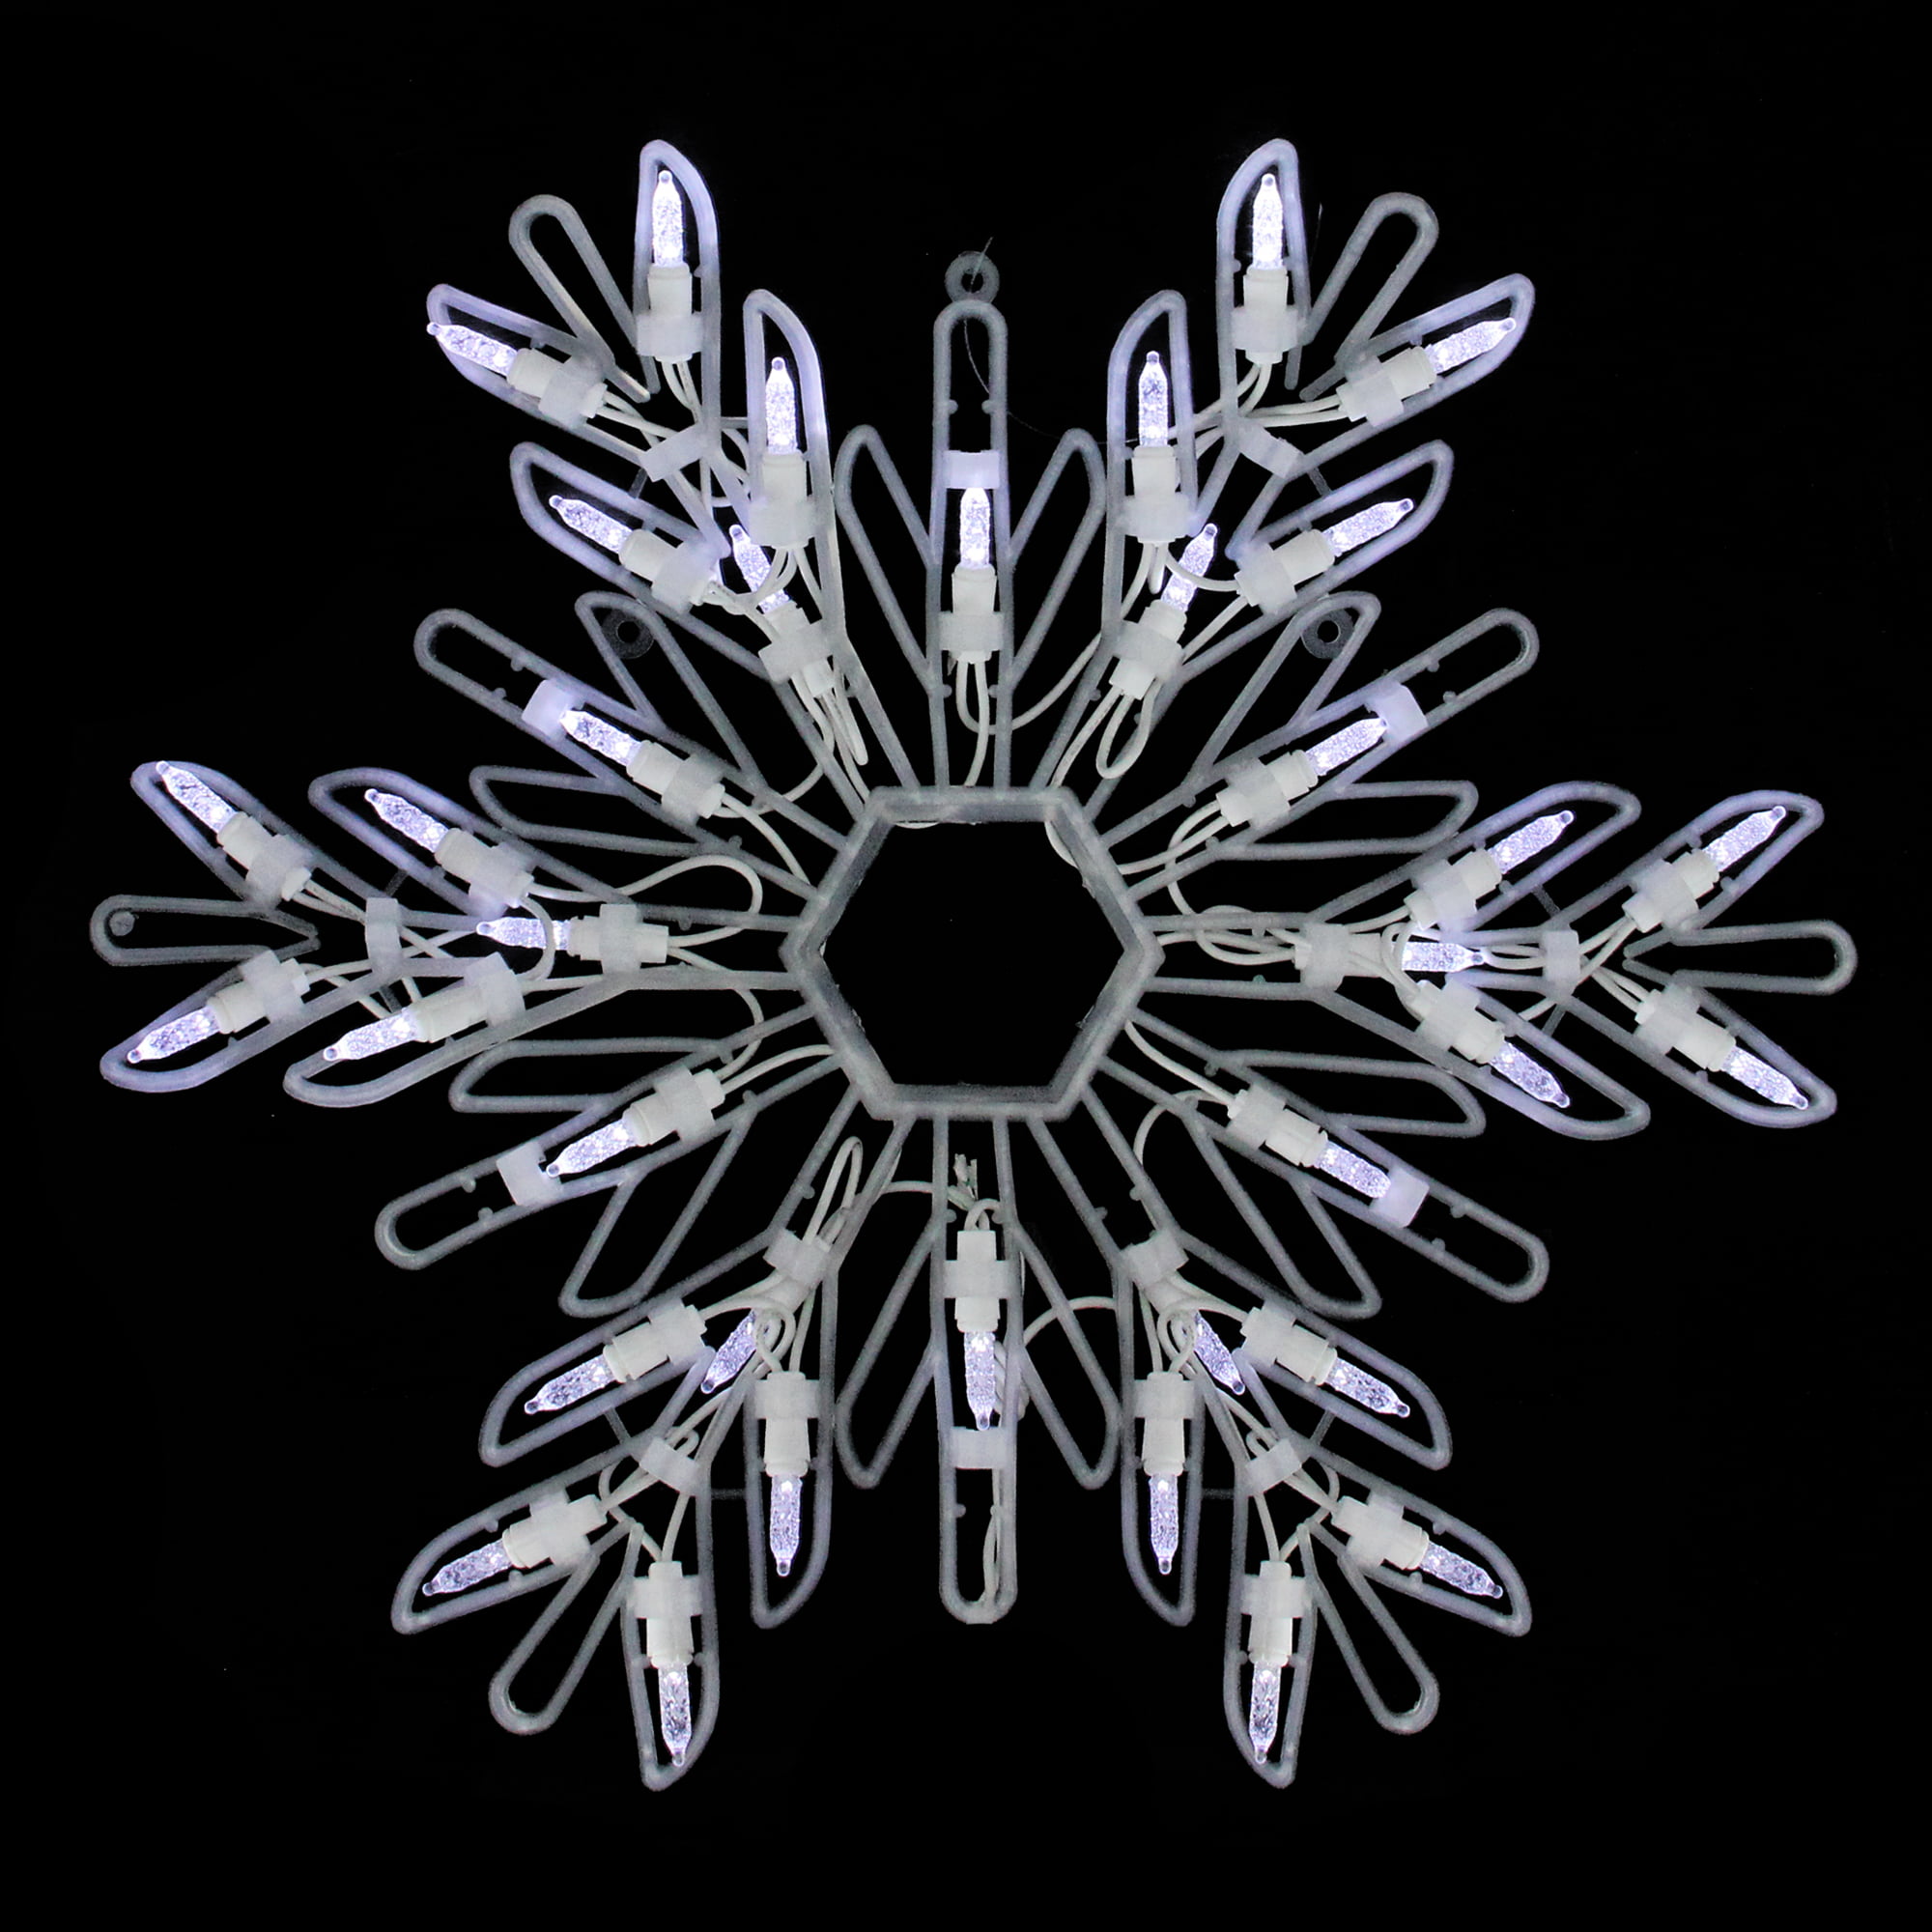 15" Cool White LED Lighted Snowflake Christmas Window Silhouette